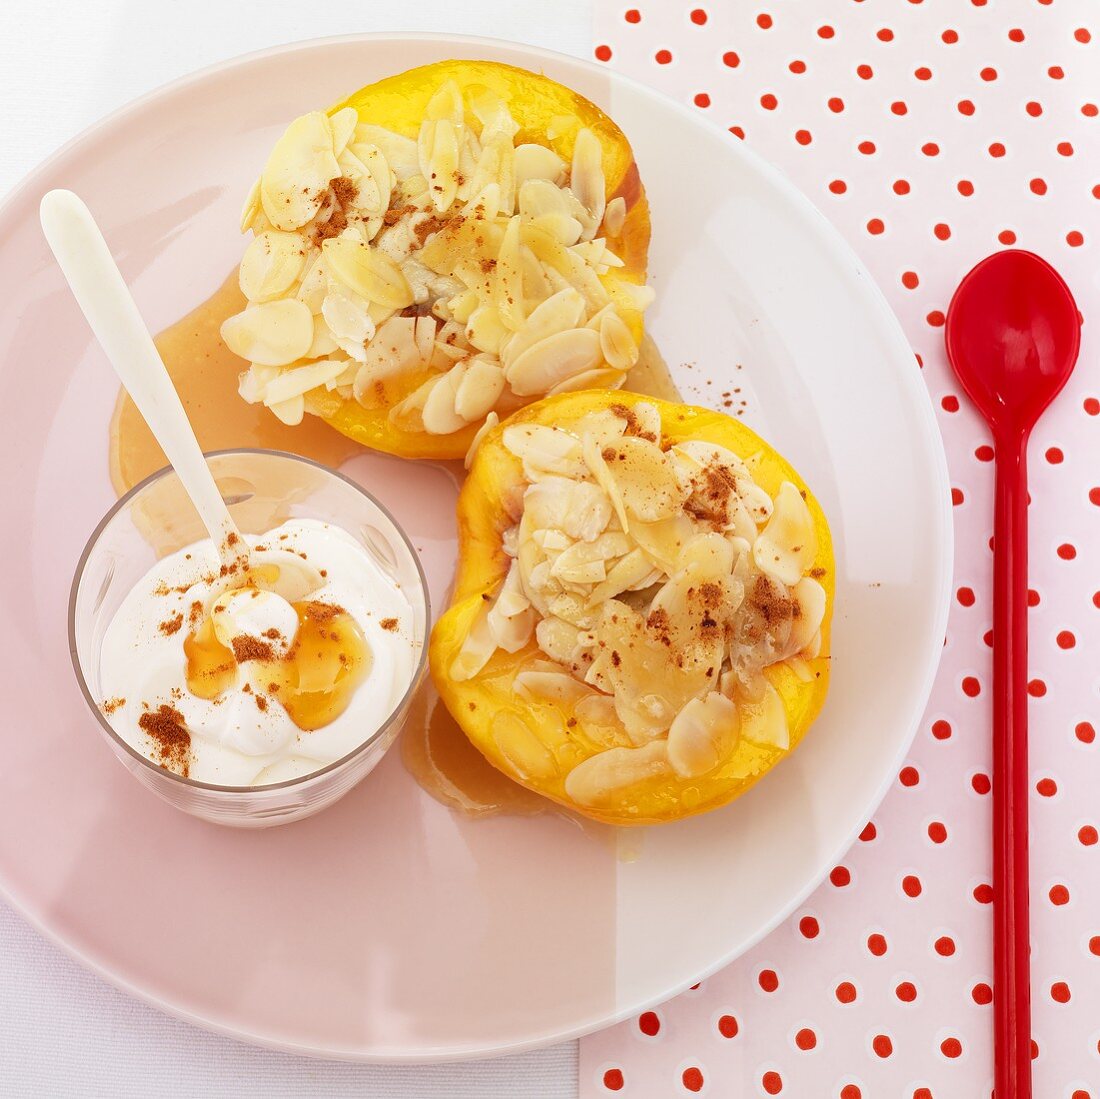 Peach halves filled with almonds and honey yogurt